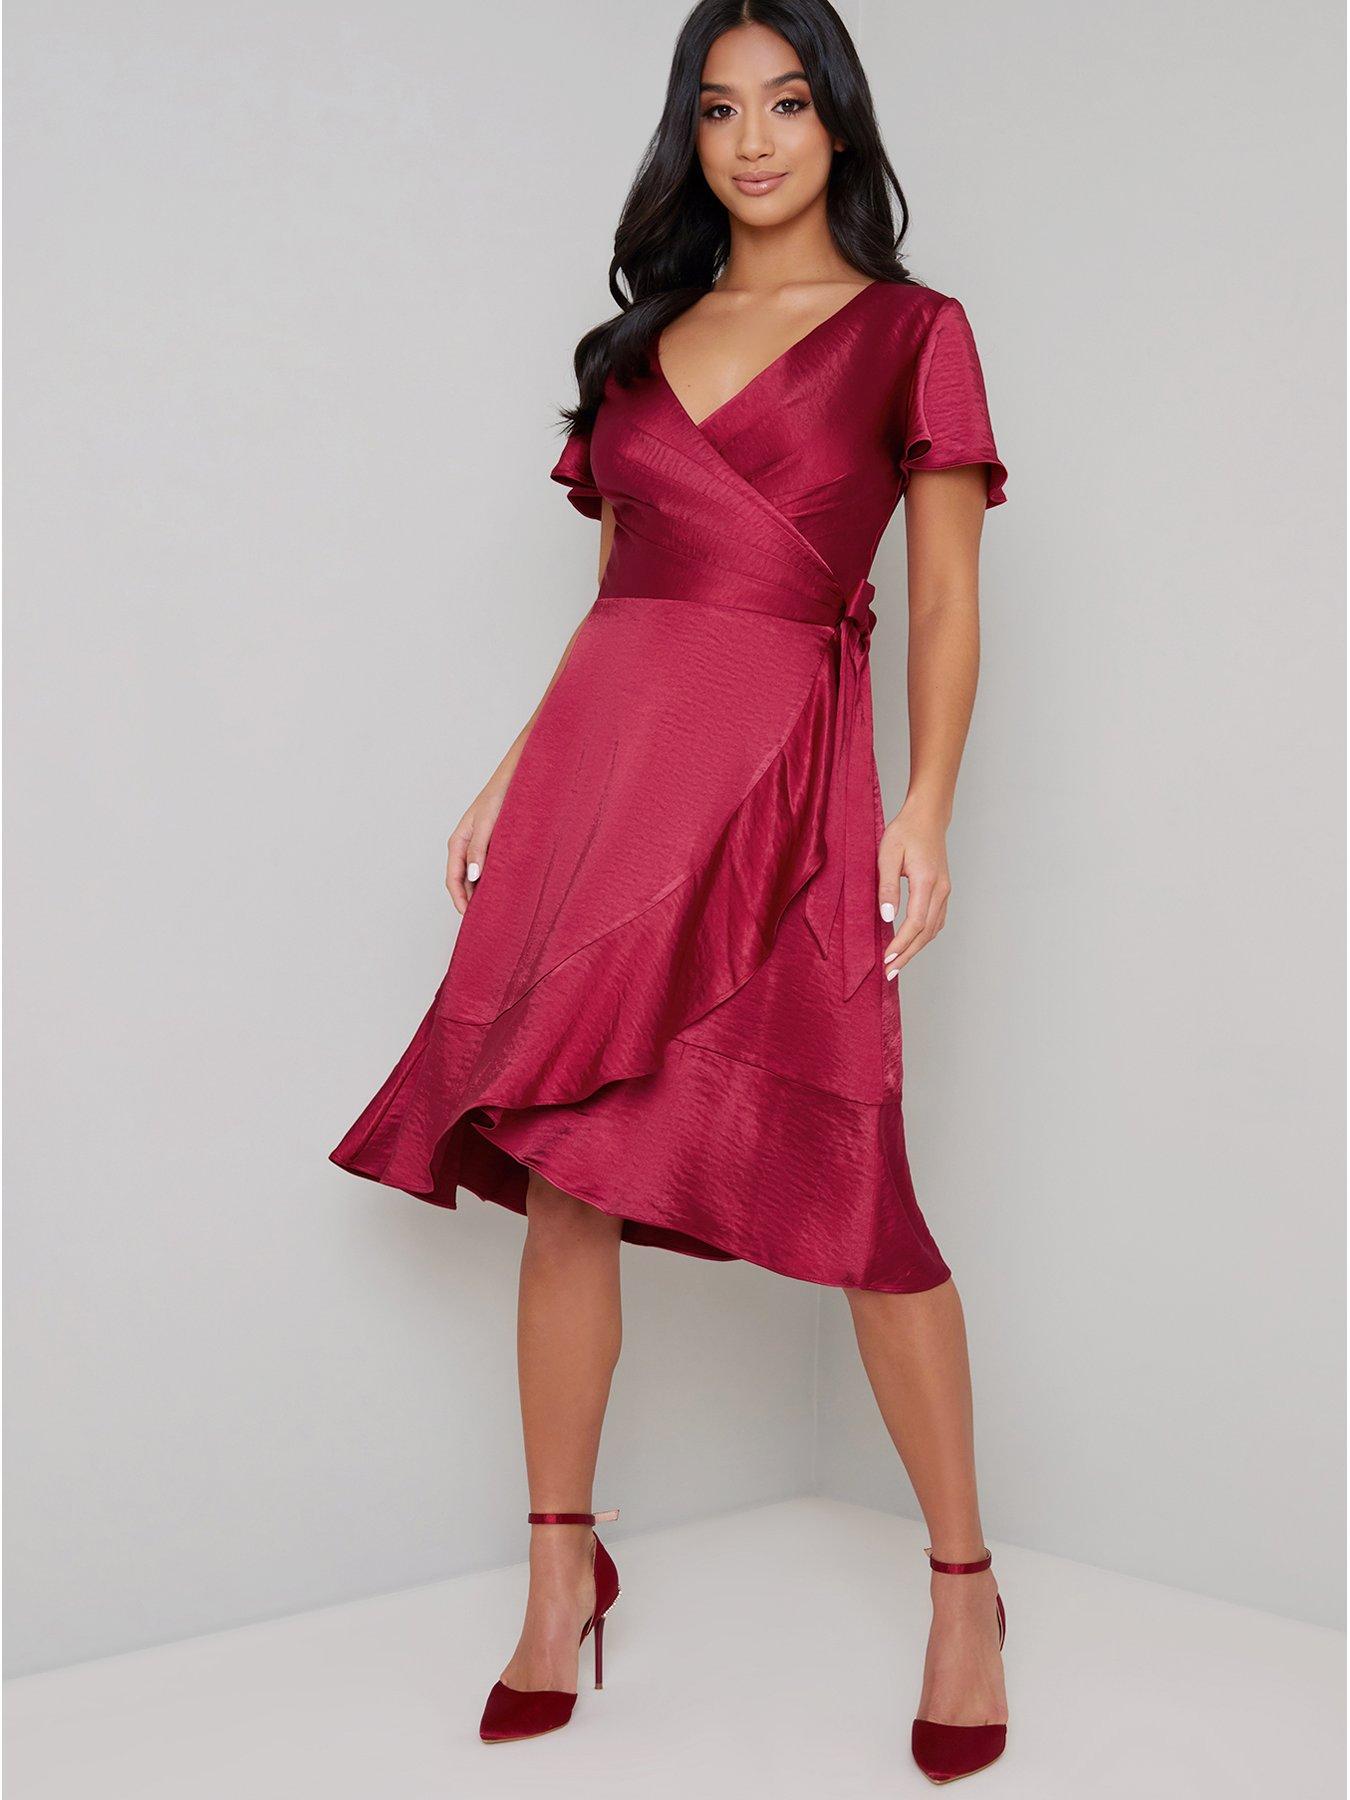 littlewoods occasion dresses